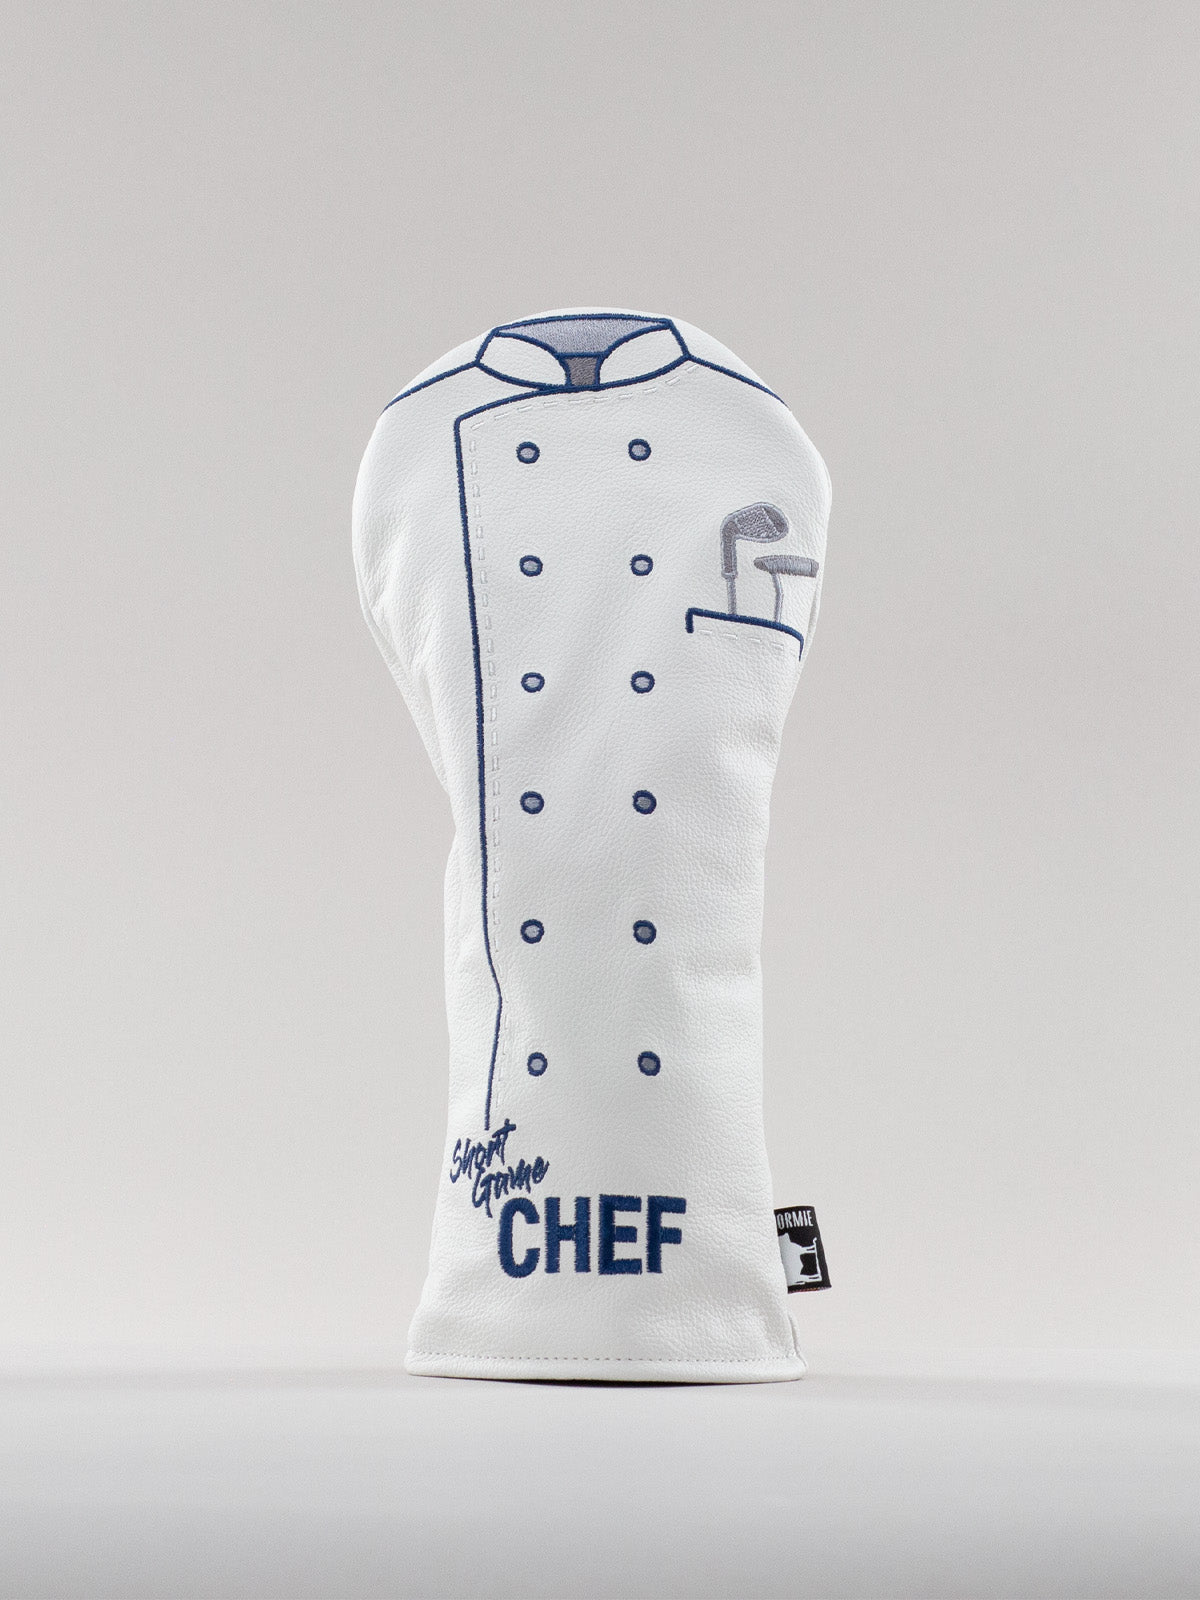 Dormie Chef's Whites for Short Game Chef